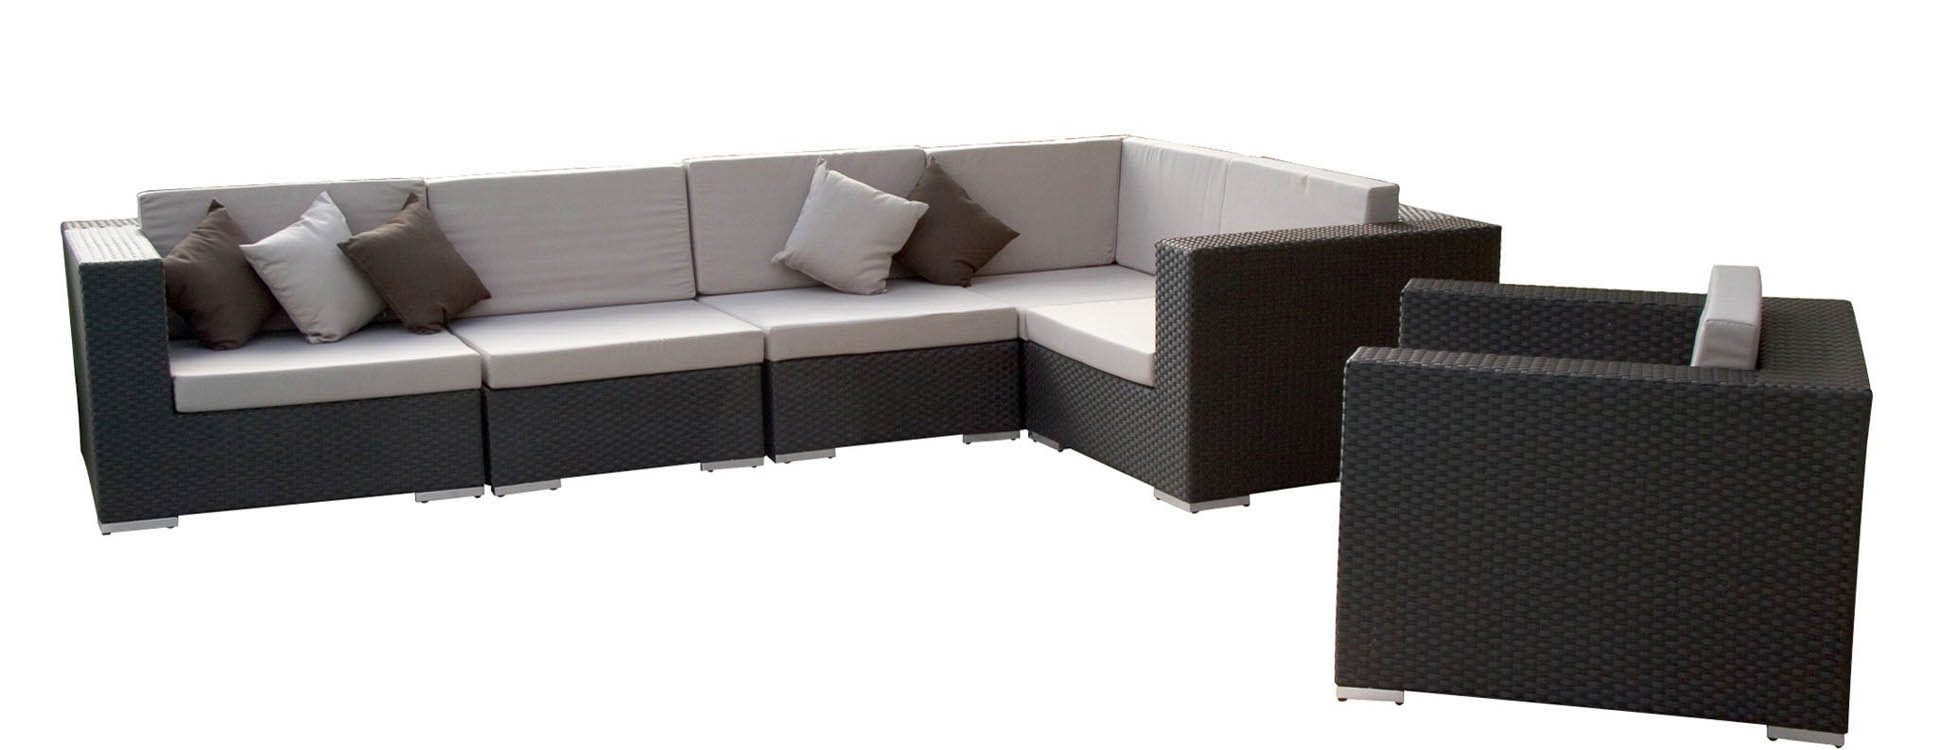 venice-sectional